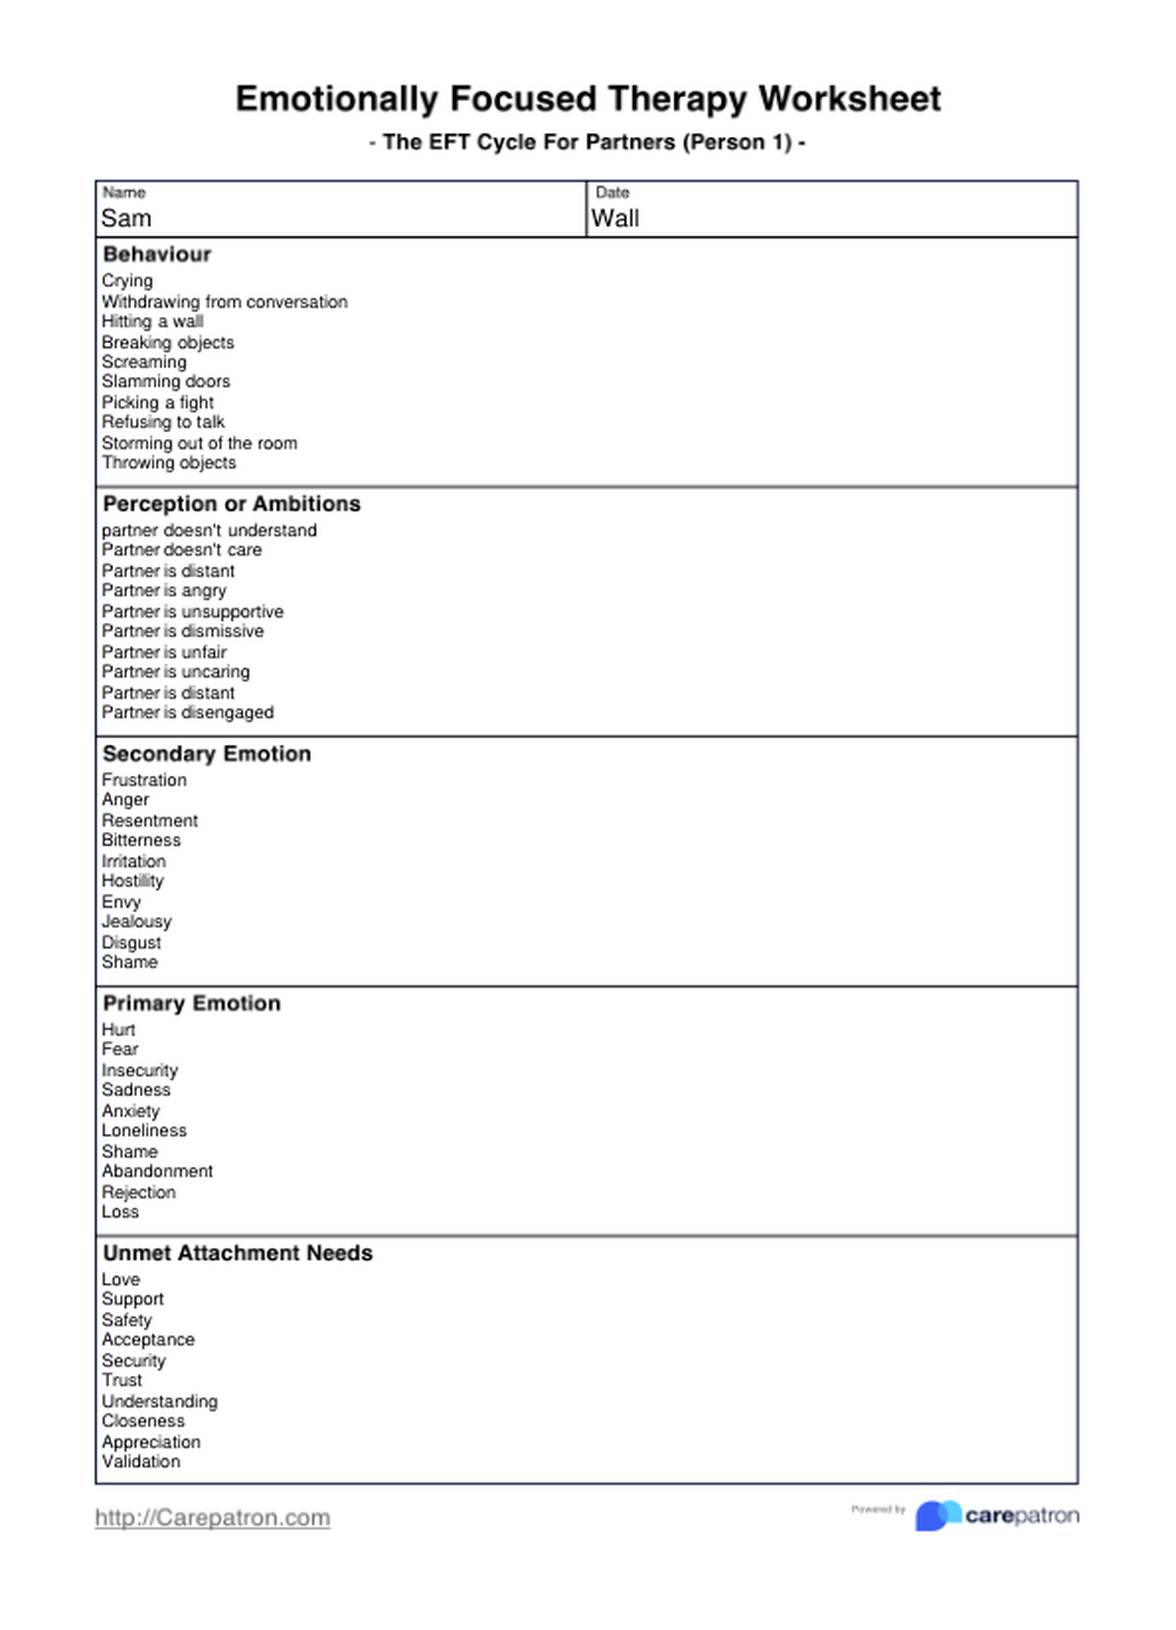 Emotionally Focused Therapy Worksheets PDF Example